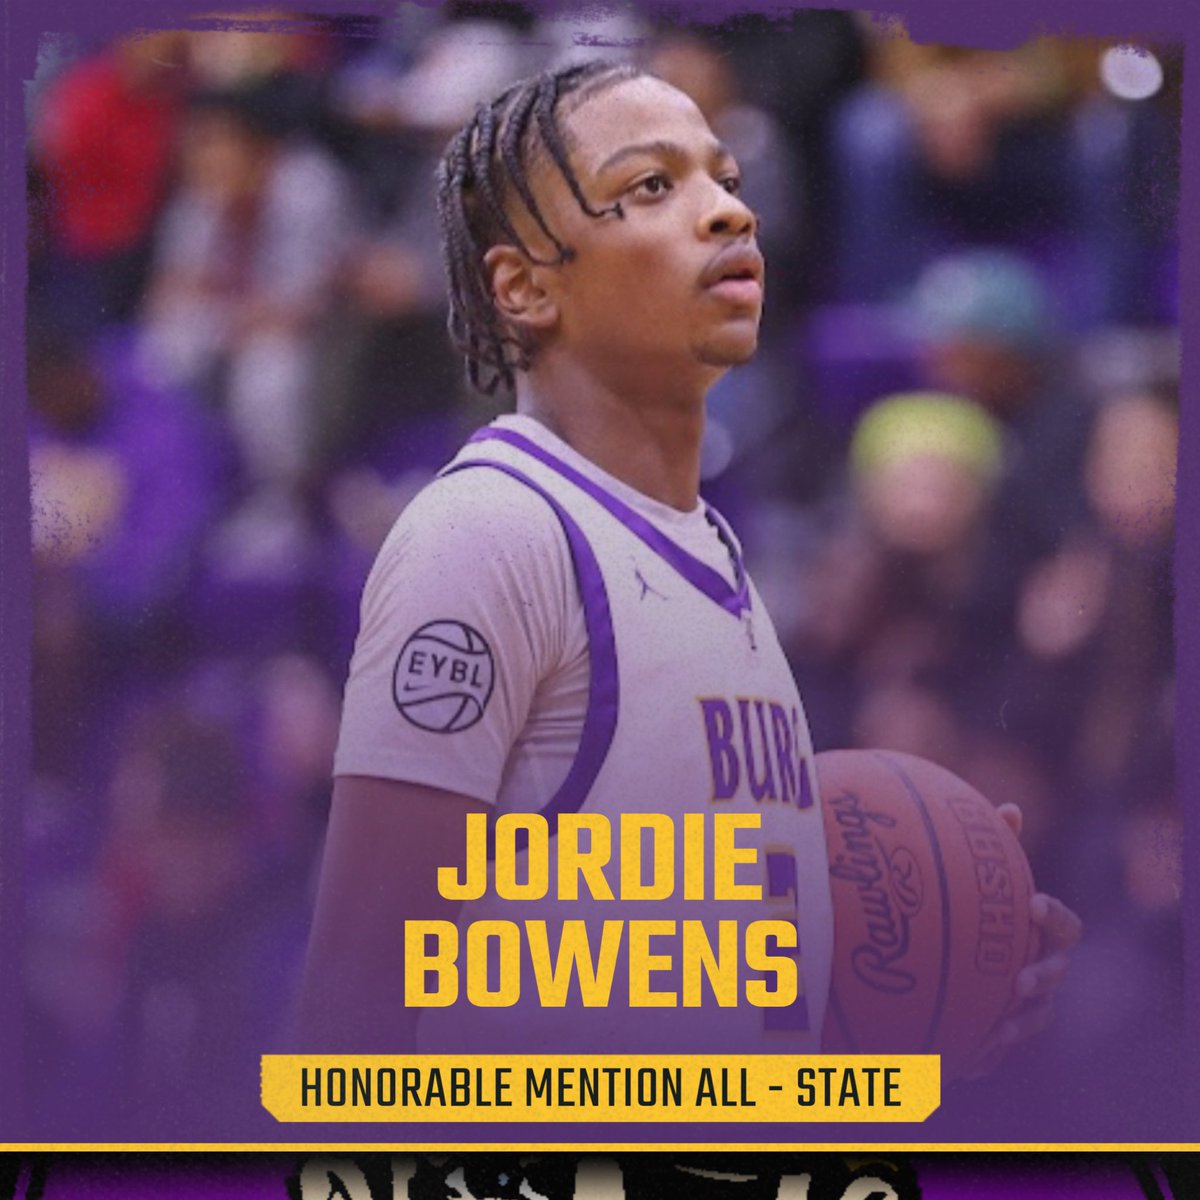 Congrats to @JordenBowens2 who was named Honorable Mention ALL-STATE!! #RTS 🏴‍☠️🏀🔥